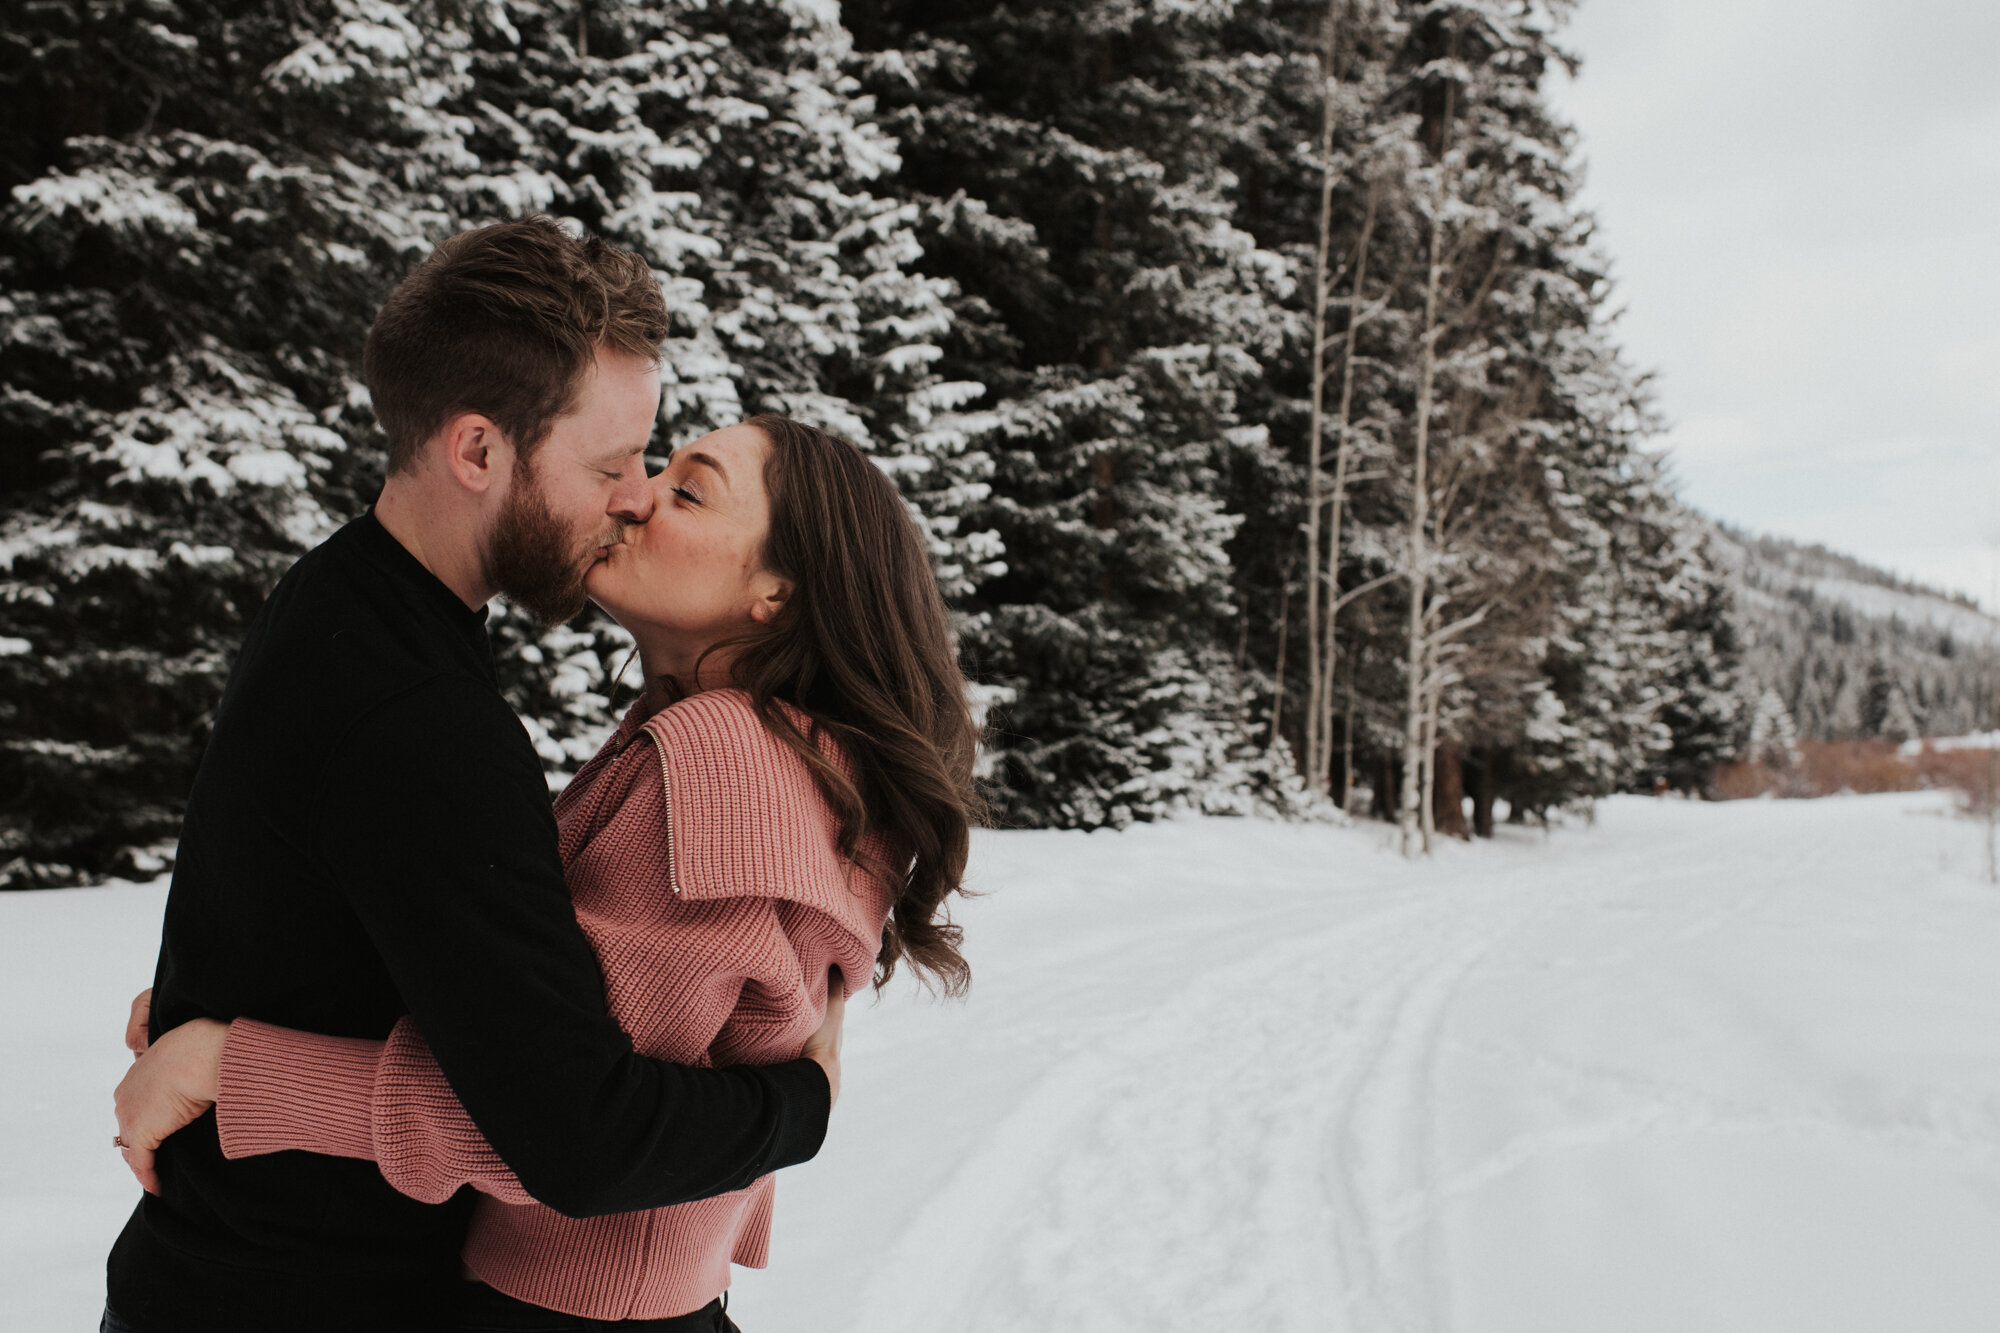 Candid Winter Engagement Session